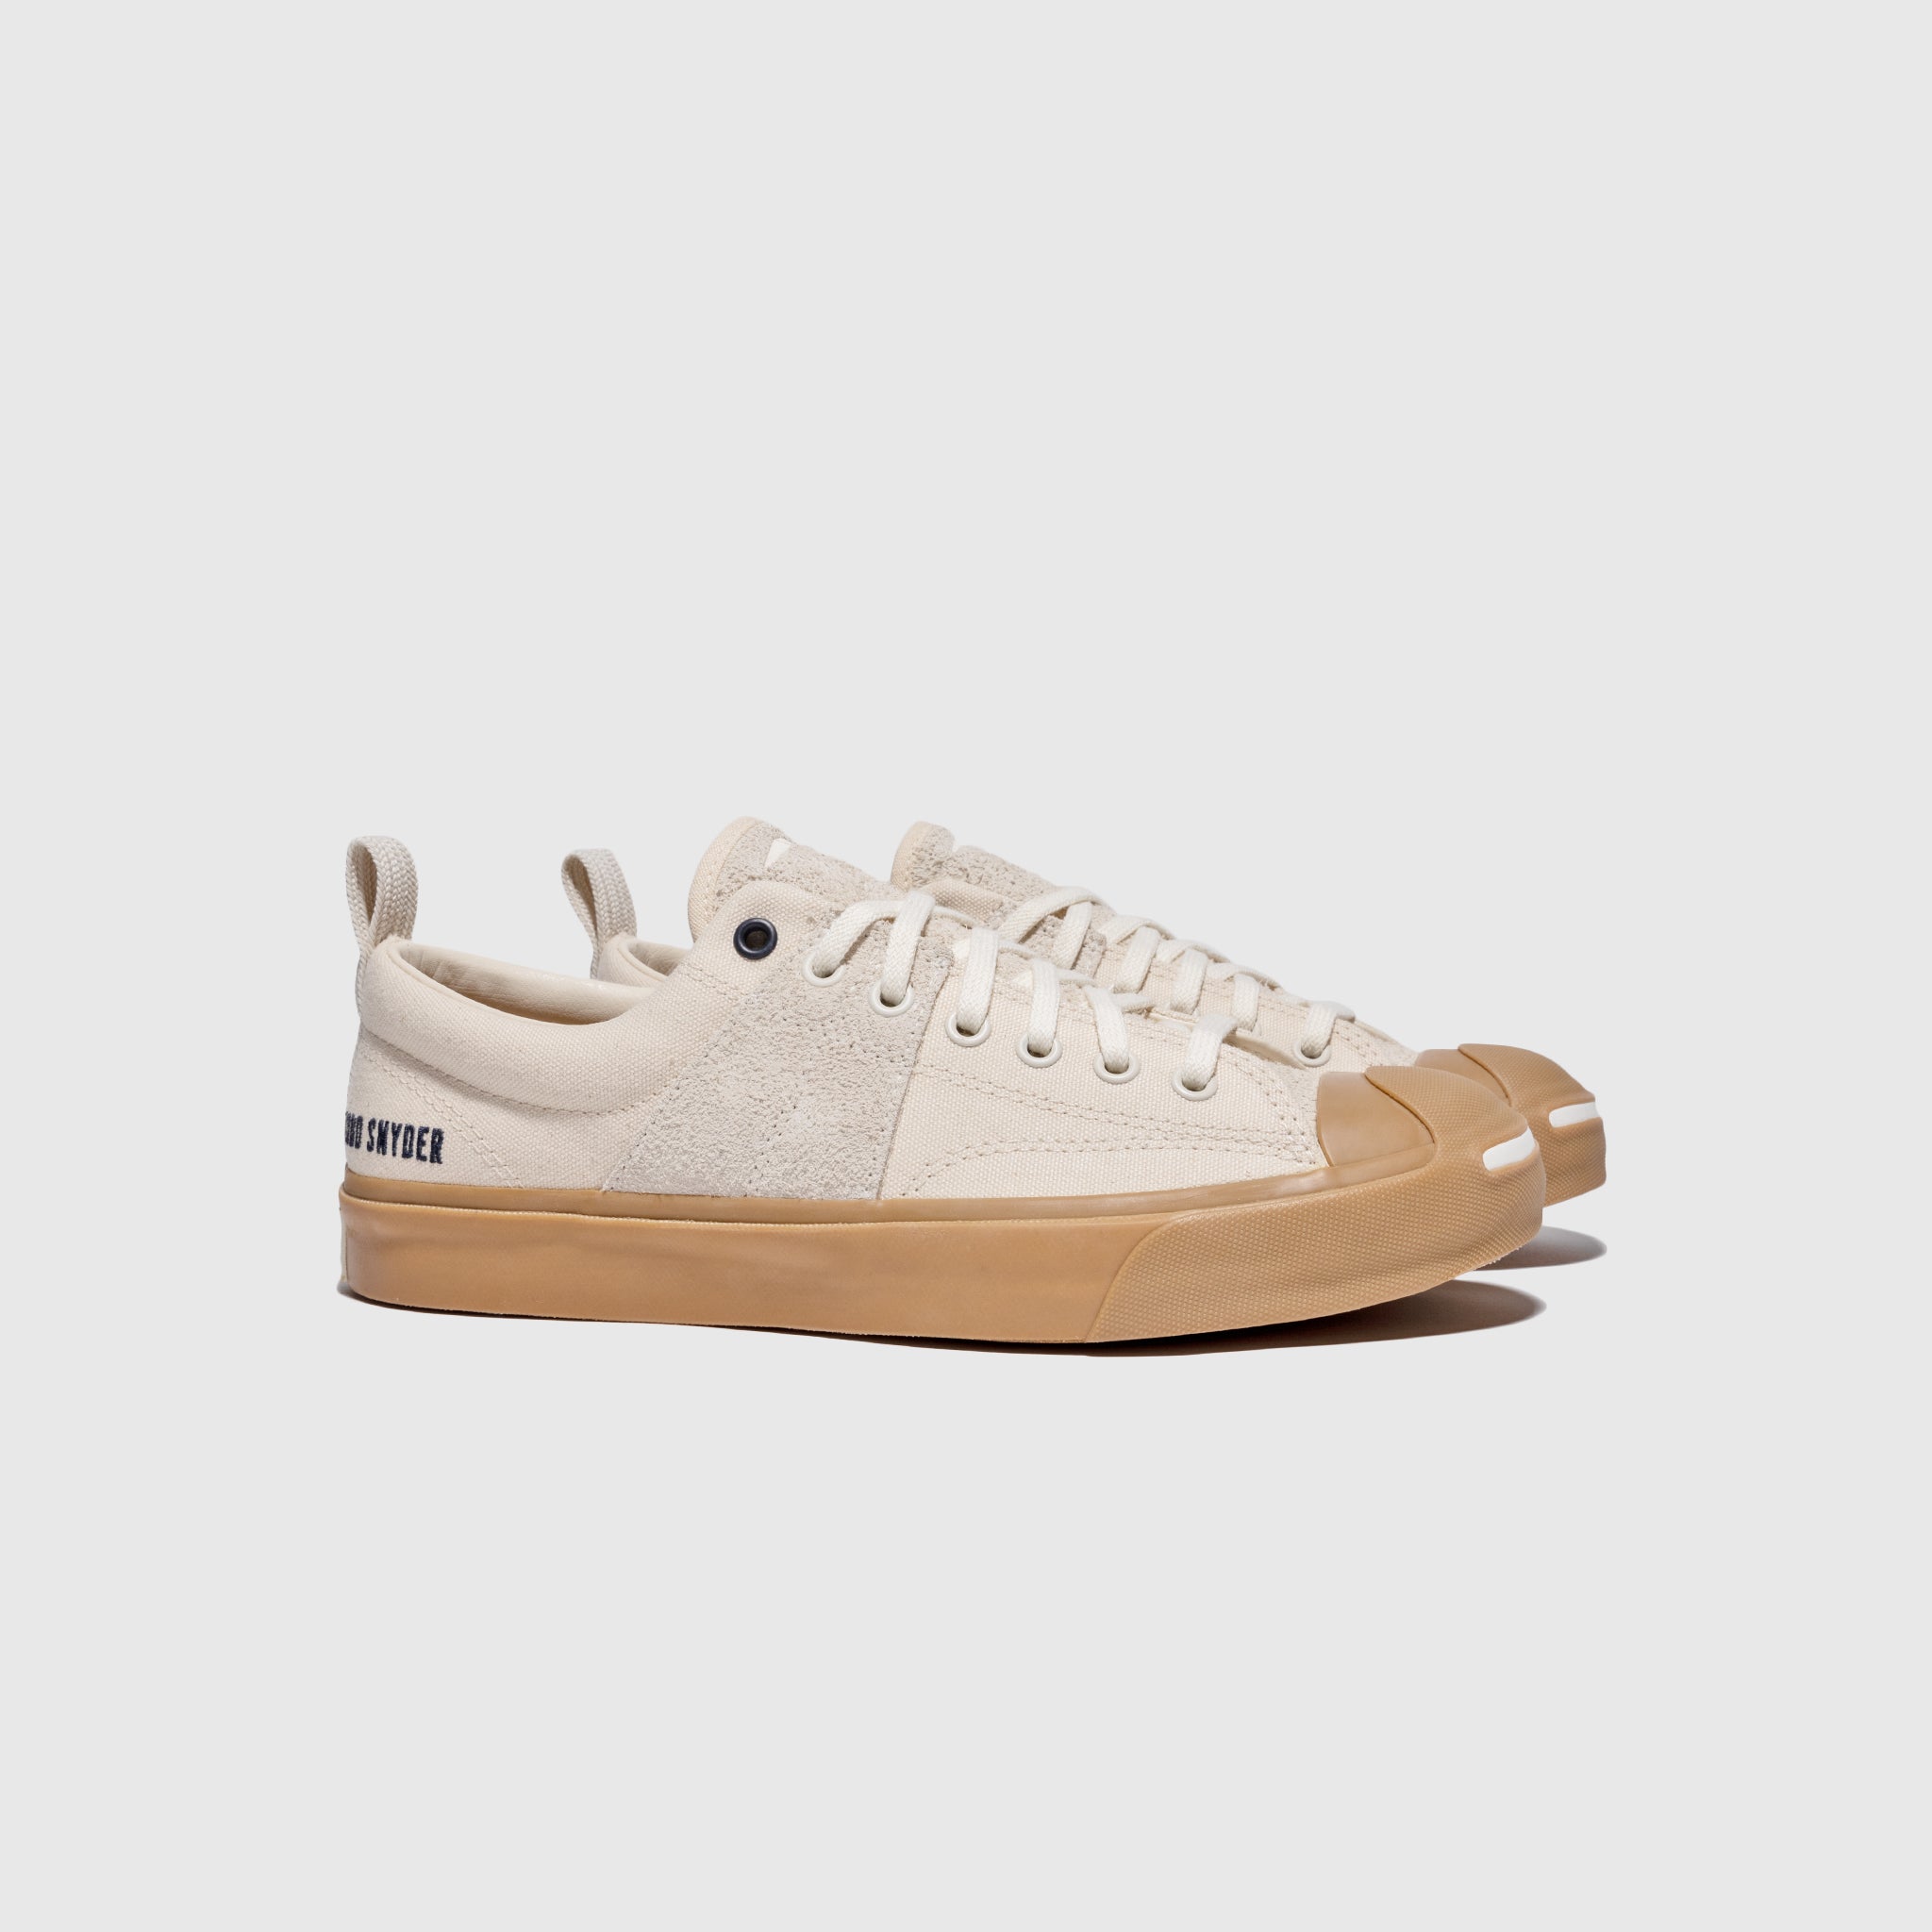 JACK PURCELL OX X TODD SNYDER